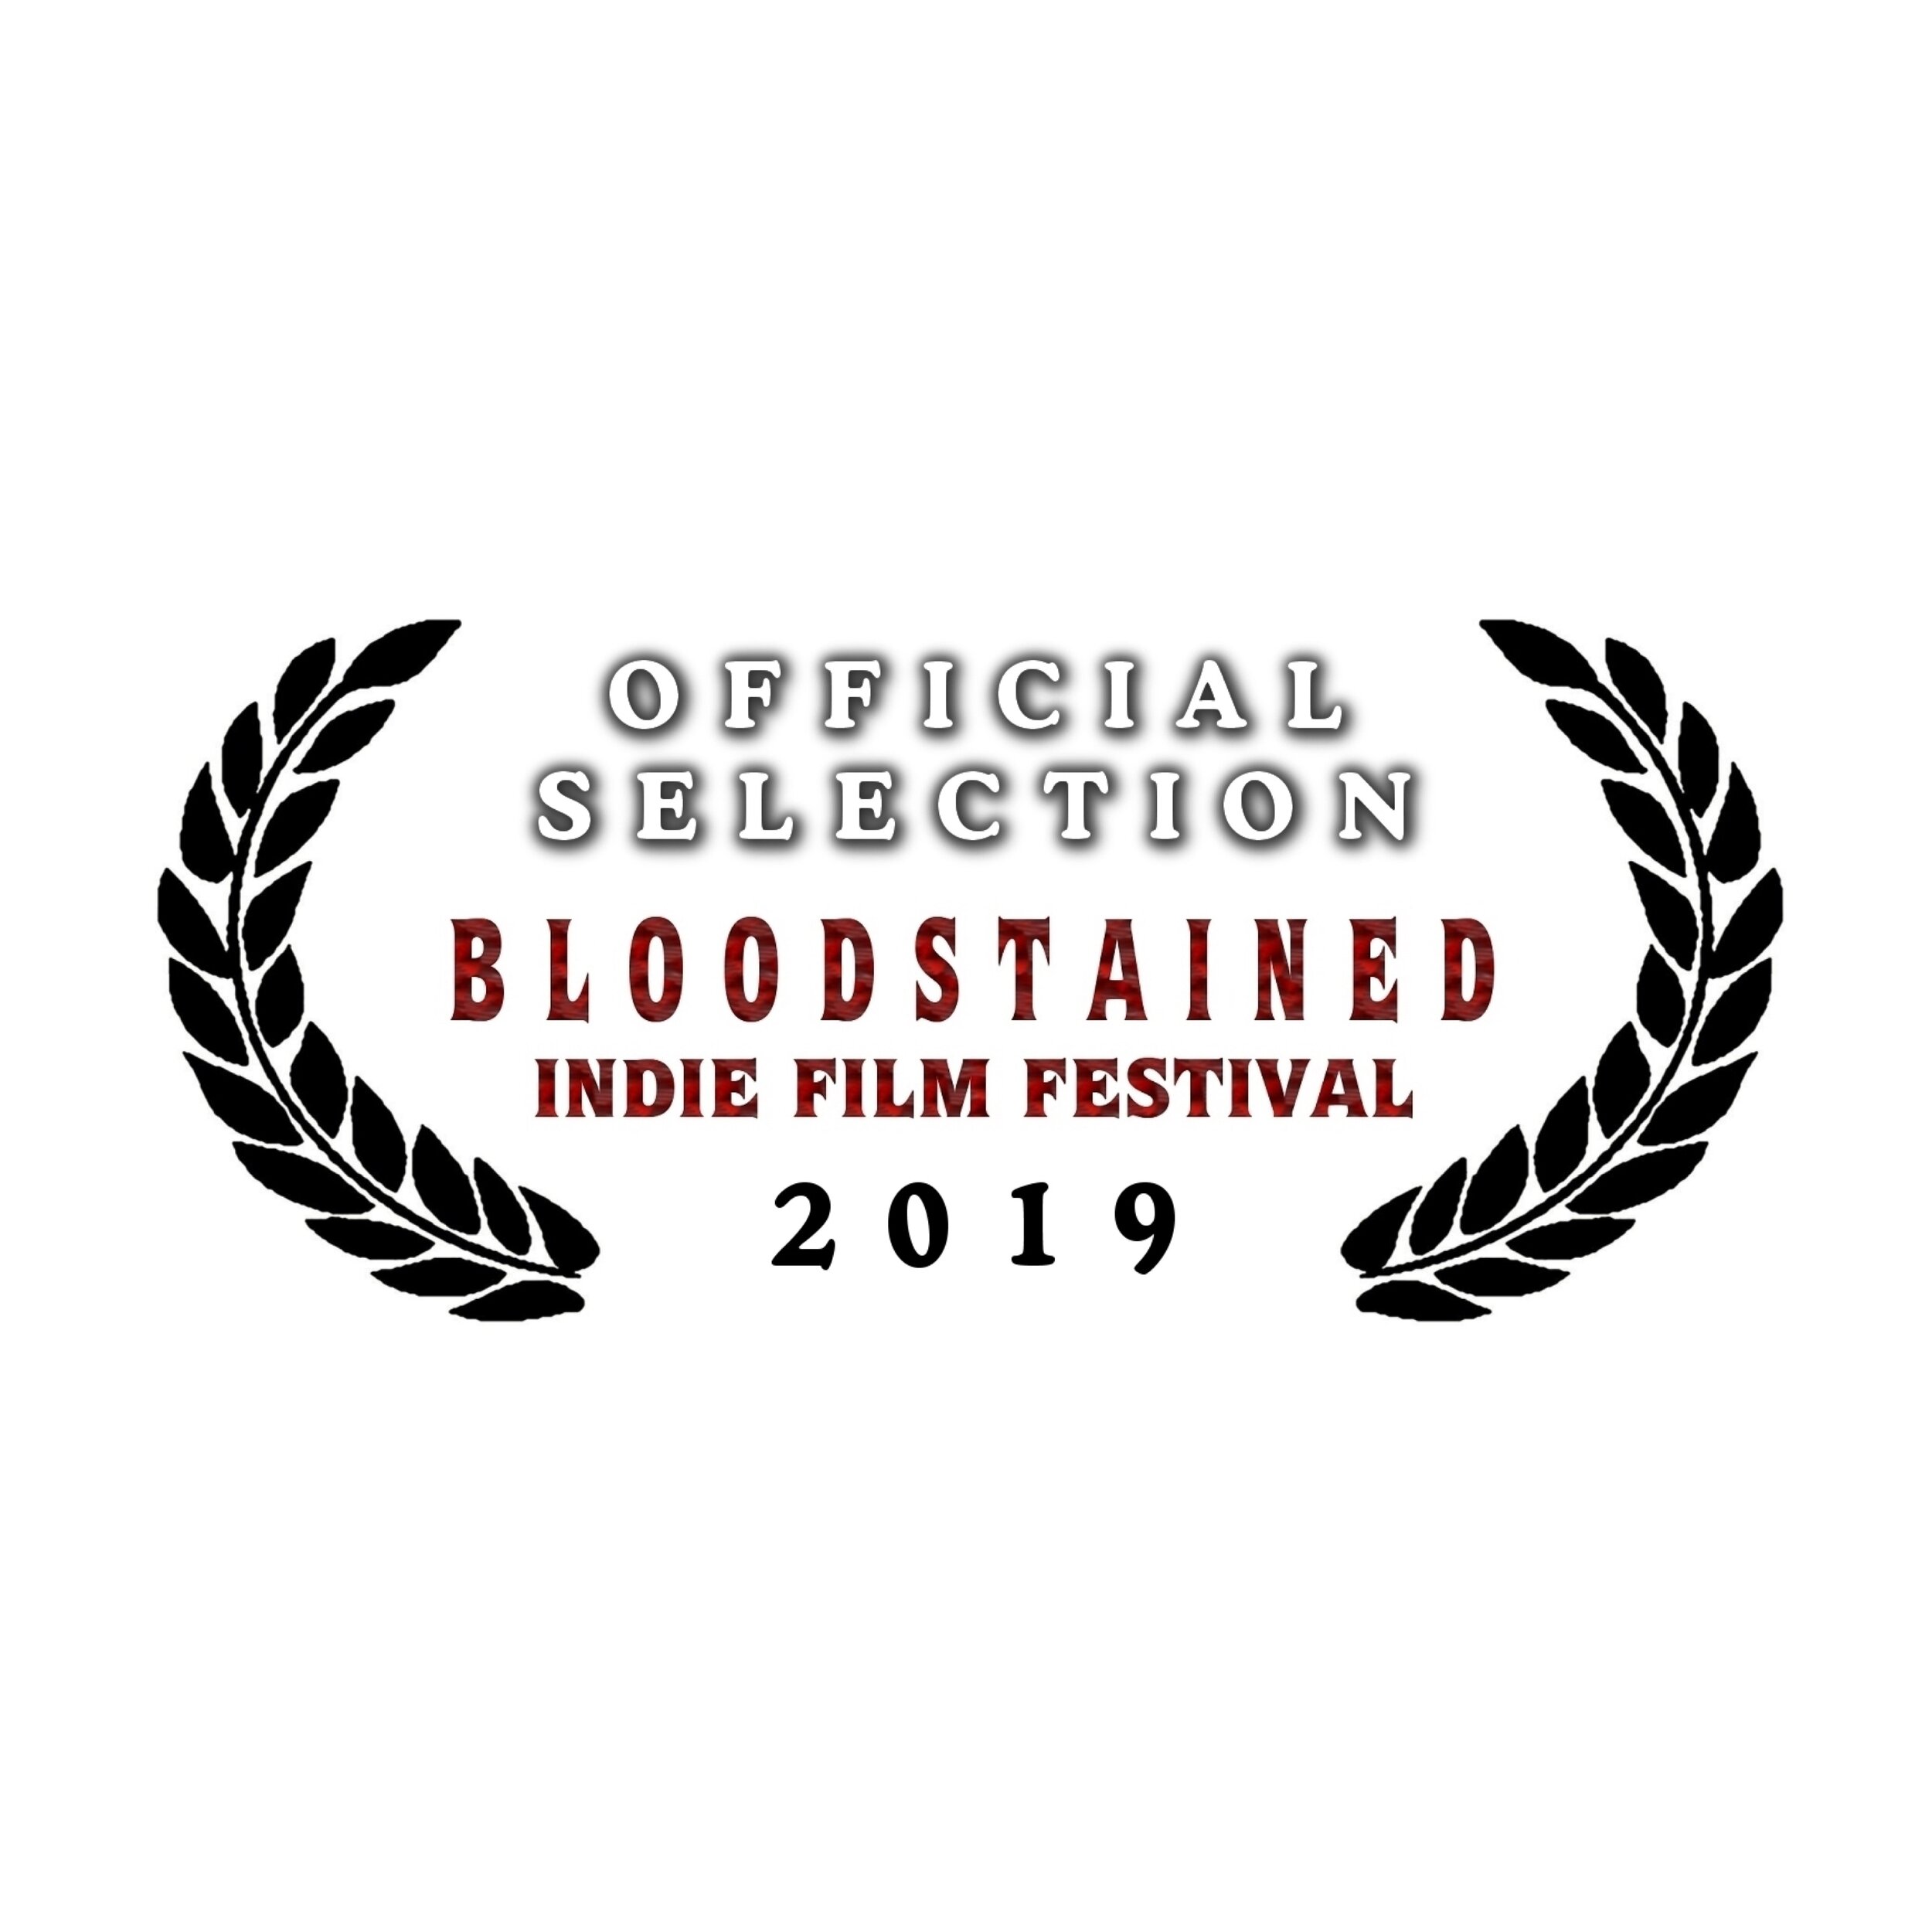 Bloodstained-Indi-Film-Festival-Official-Selection-3024x3024.jpg